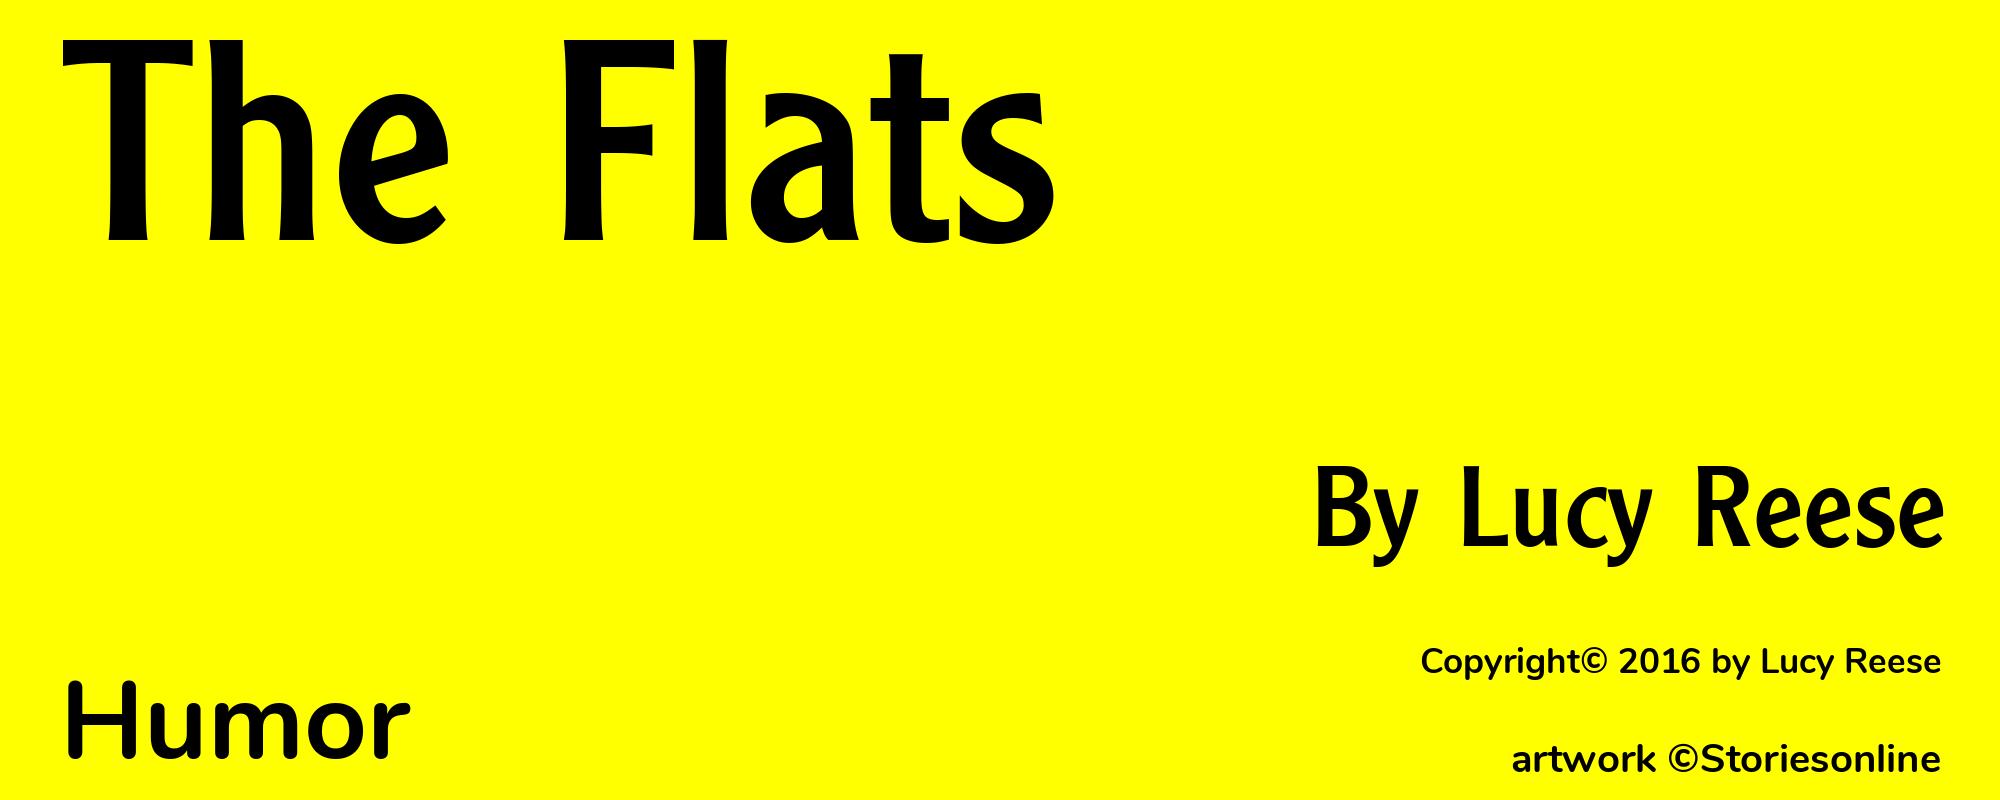 The Flats - Cover